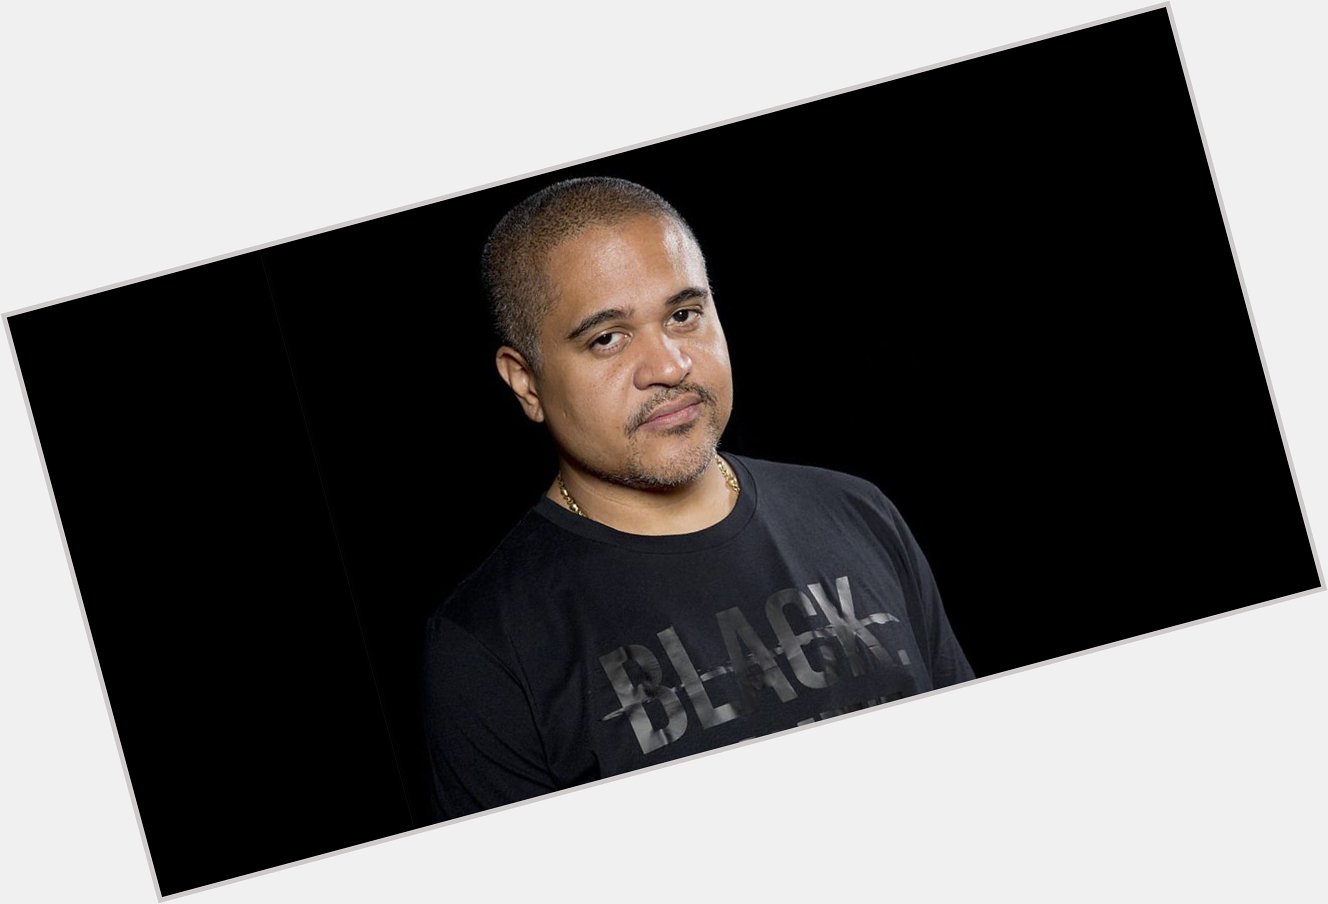 Happy birthday to our friend and Murder Inc. founder Irv Gotti  